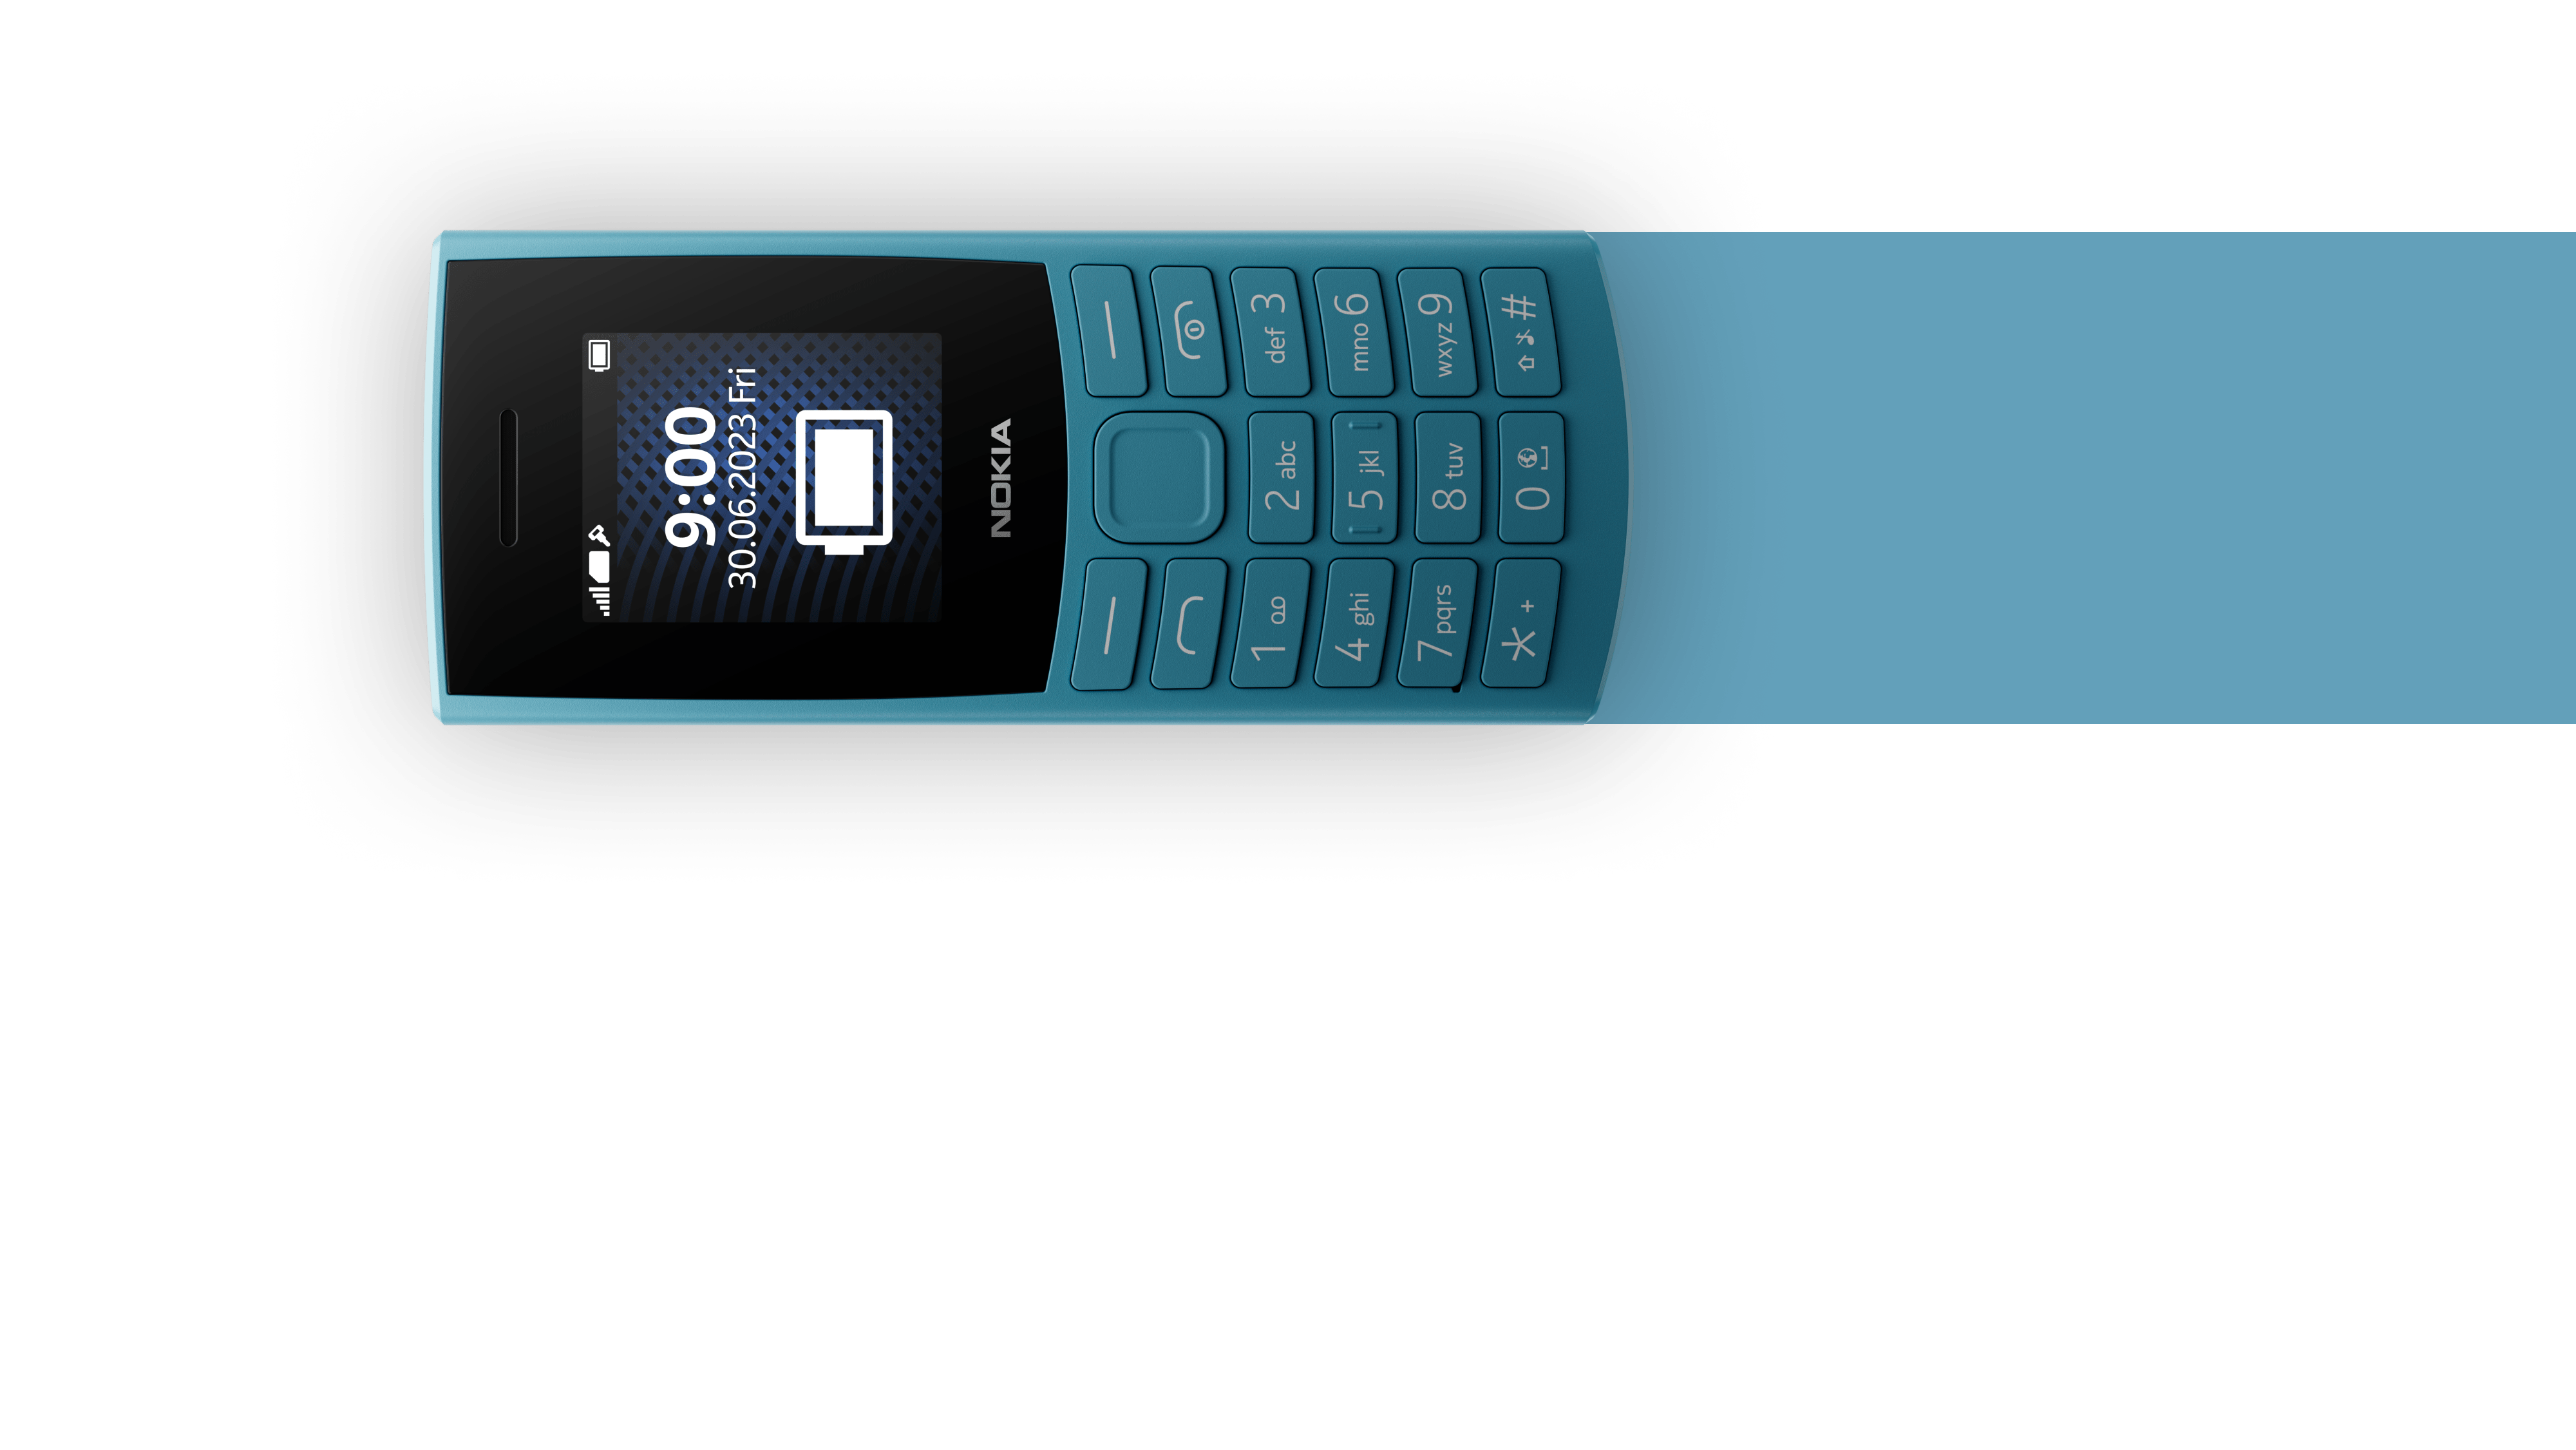 phone Nokia 105 with feature internet 4G